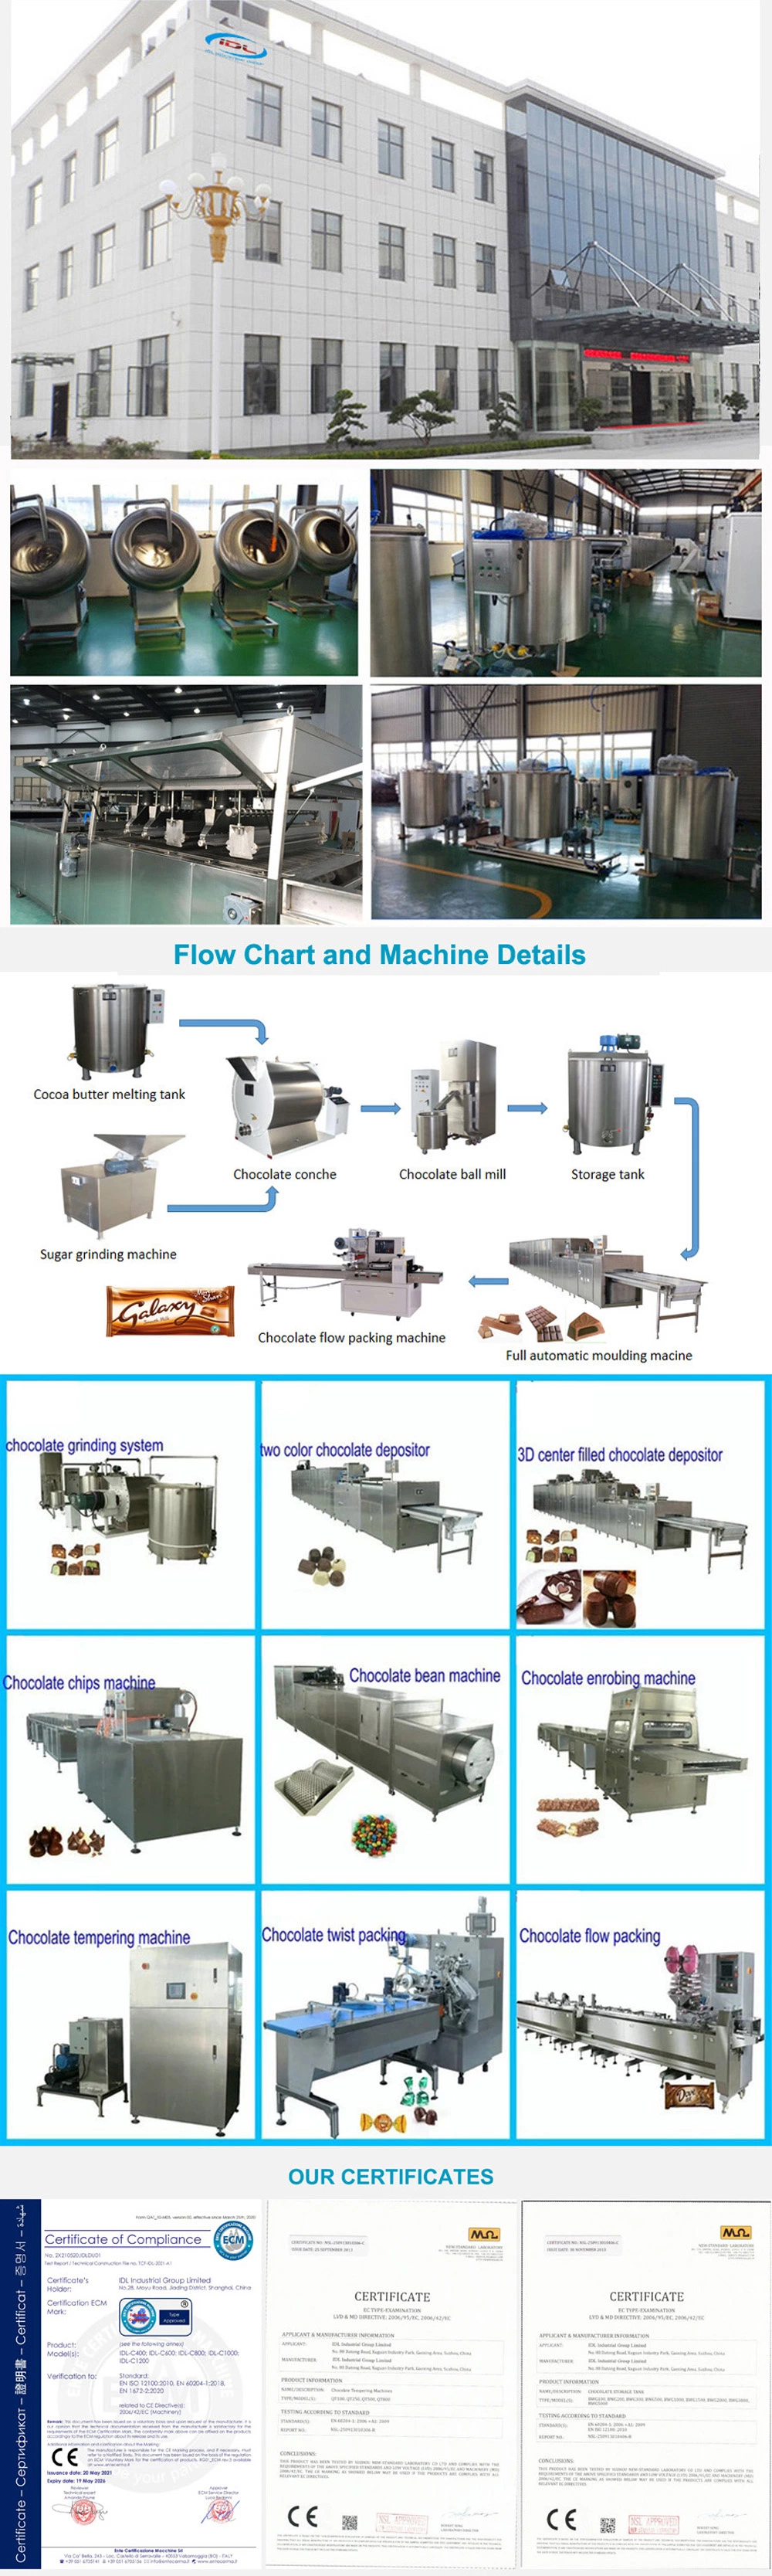 Full Automatic Chocolate Moulding Line for Making Chocolate Bars, Chocolate Tablets